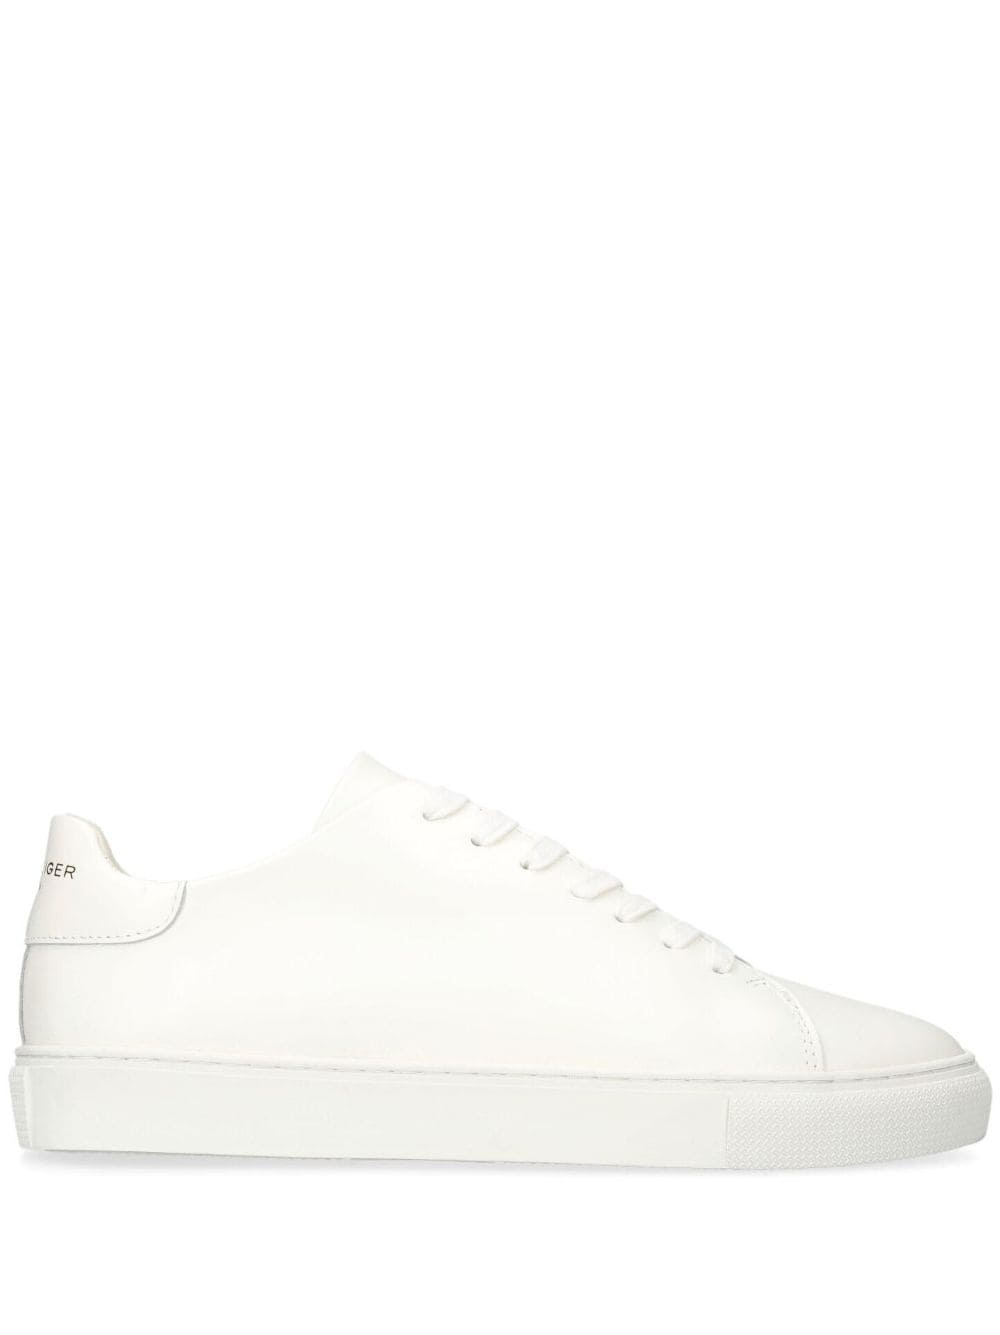 Lennon lace-up sneakers